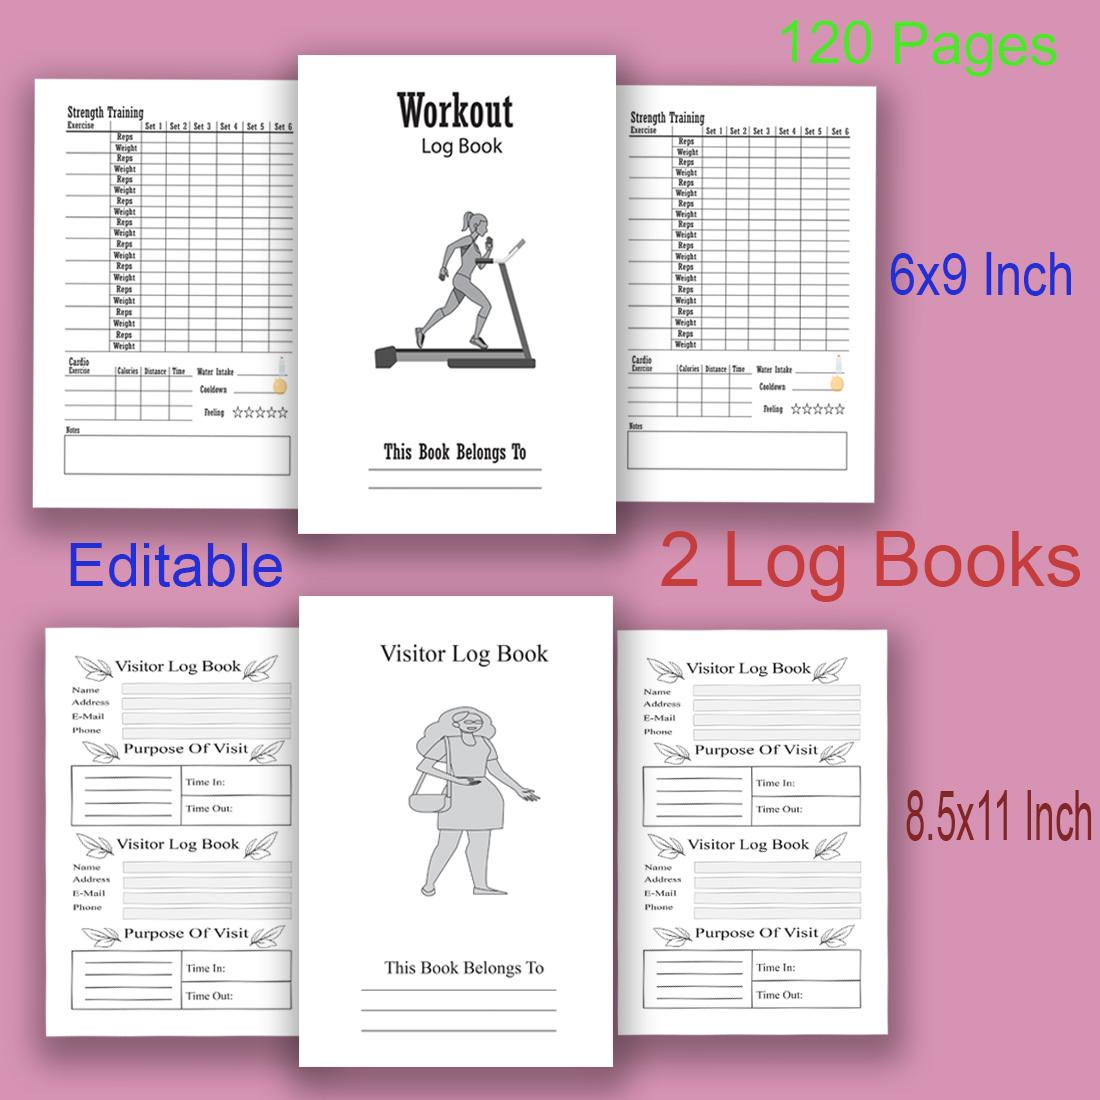 Workout Log Book Fitness  KDP Interior Graphic by Beast Designer